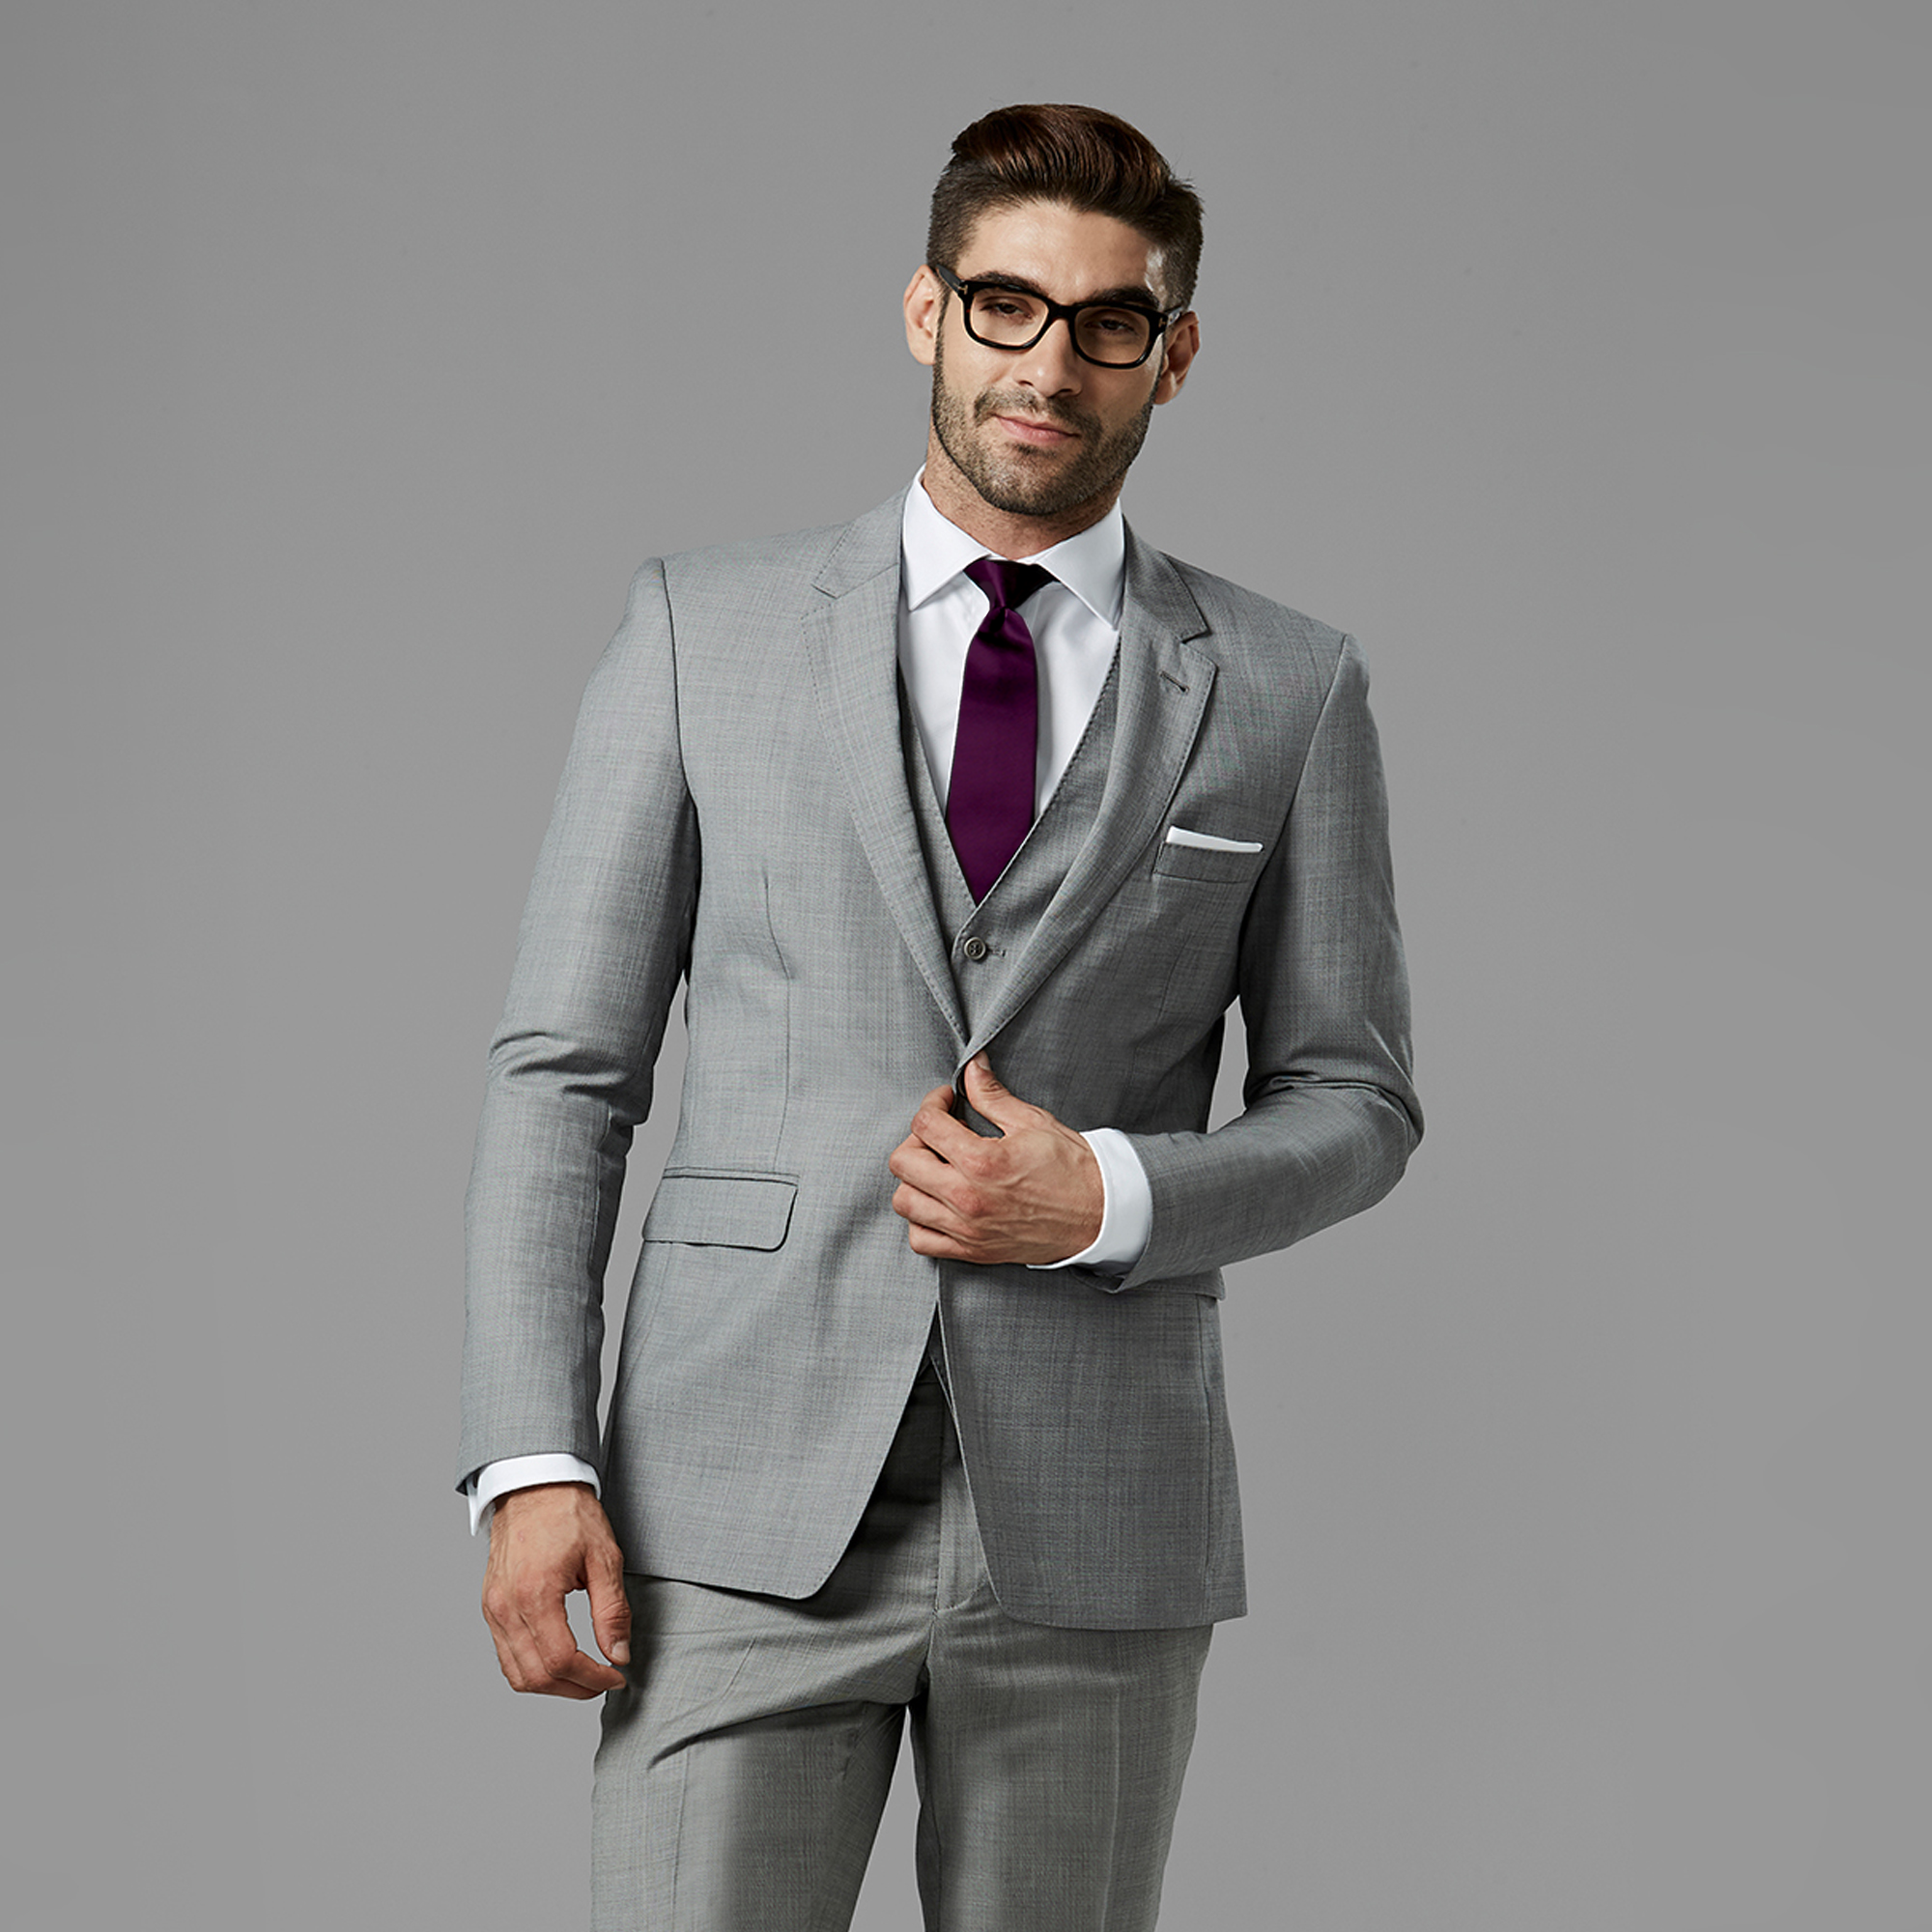 The Best Summer Wedding Outfits for Men